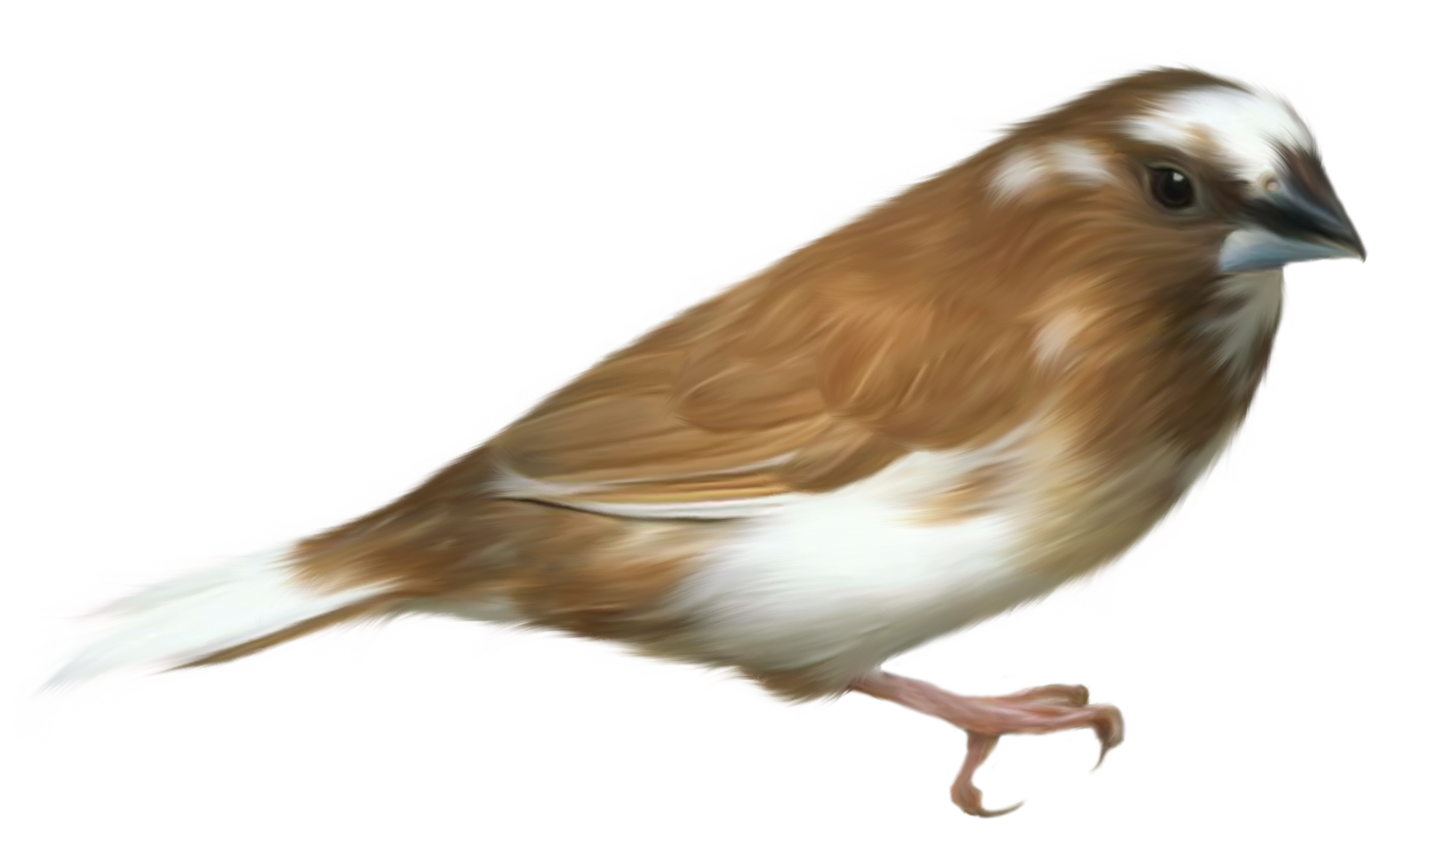 The Beauty Of Bird Pngs Using Transparent Images In Your Designs